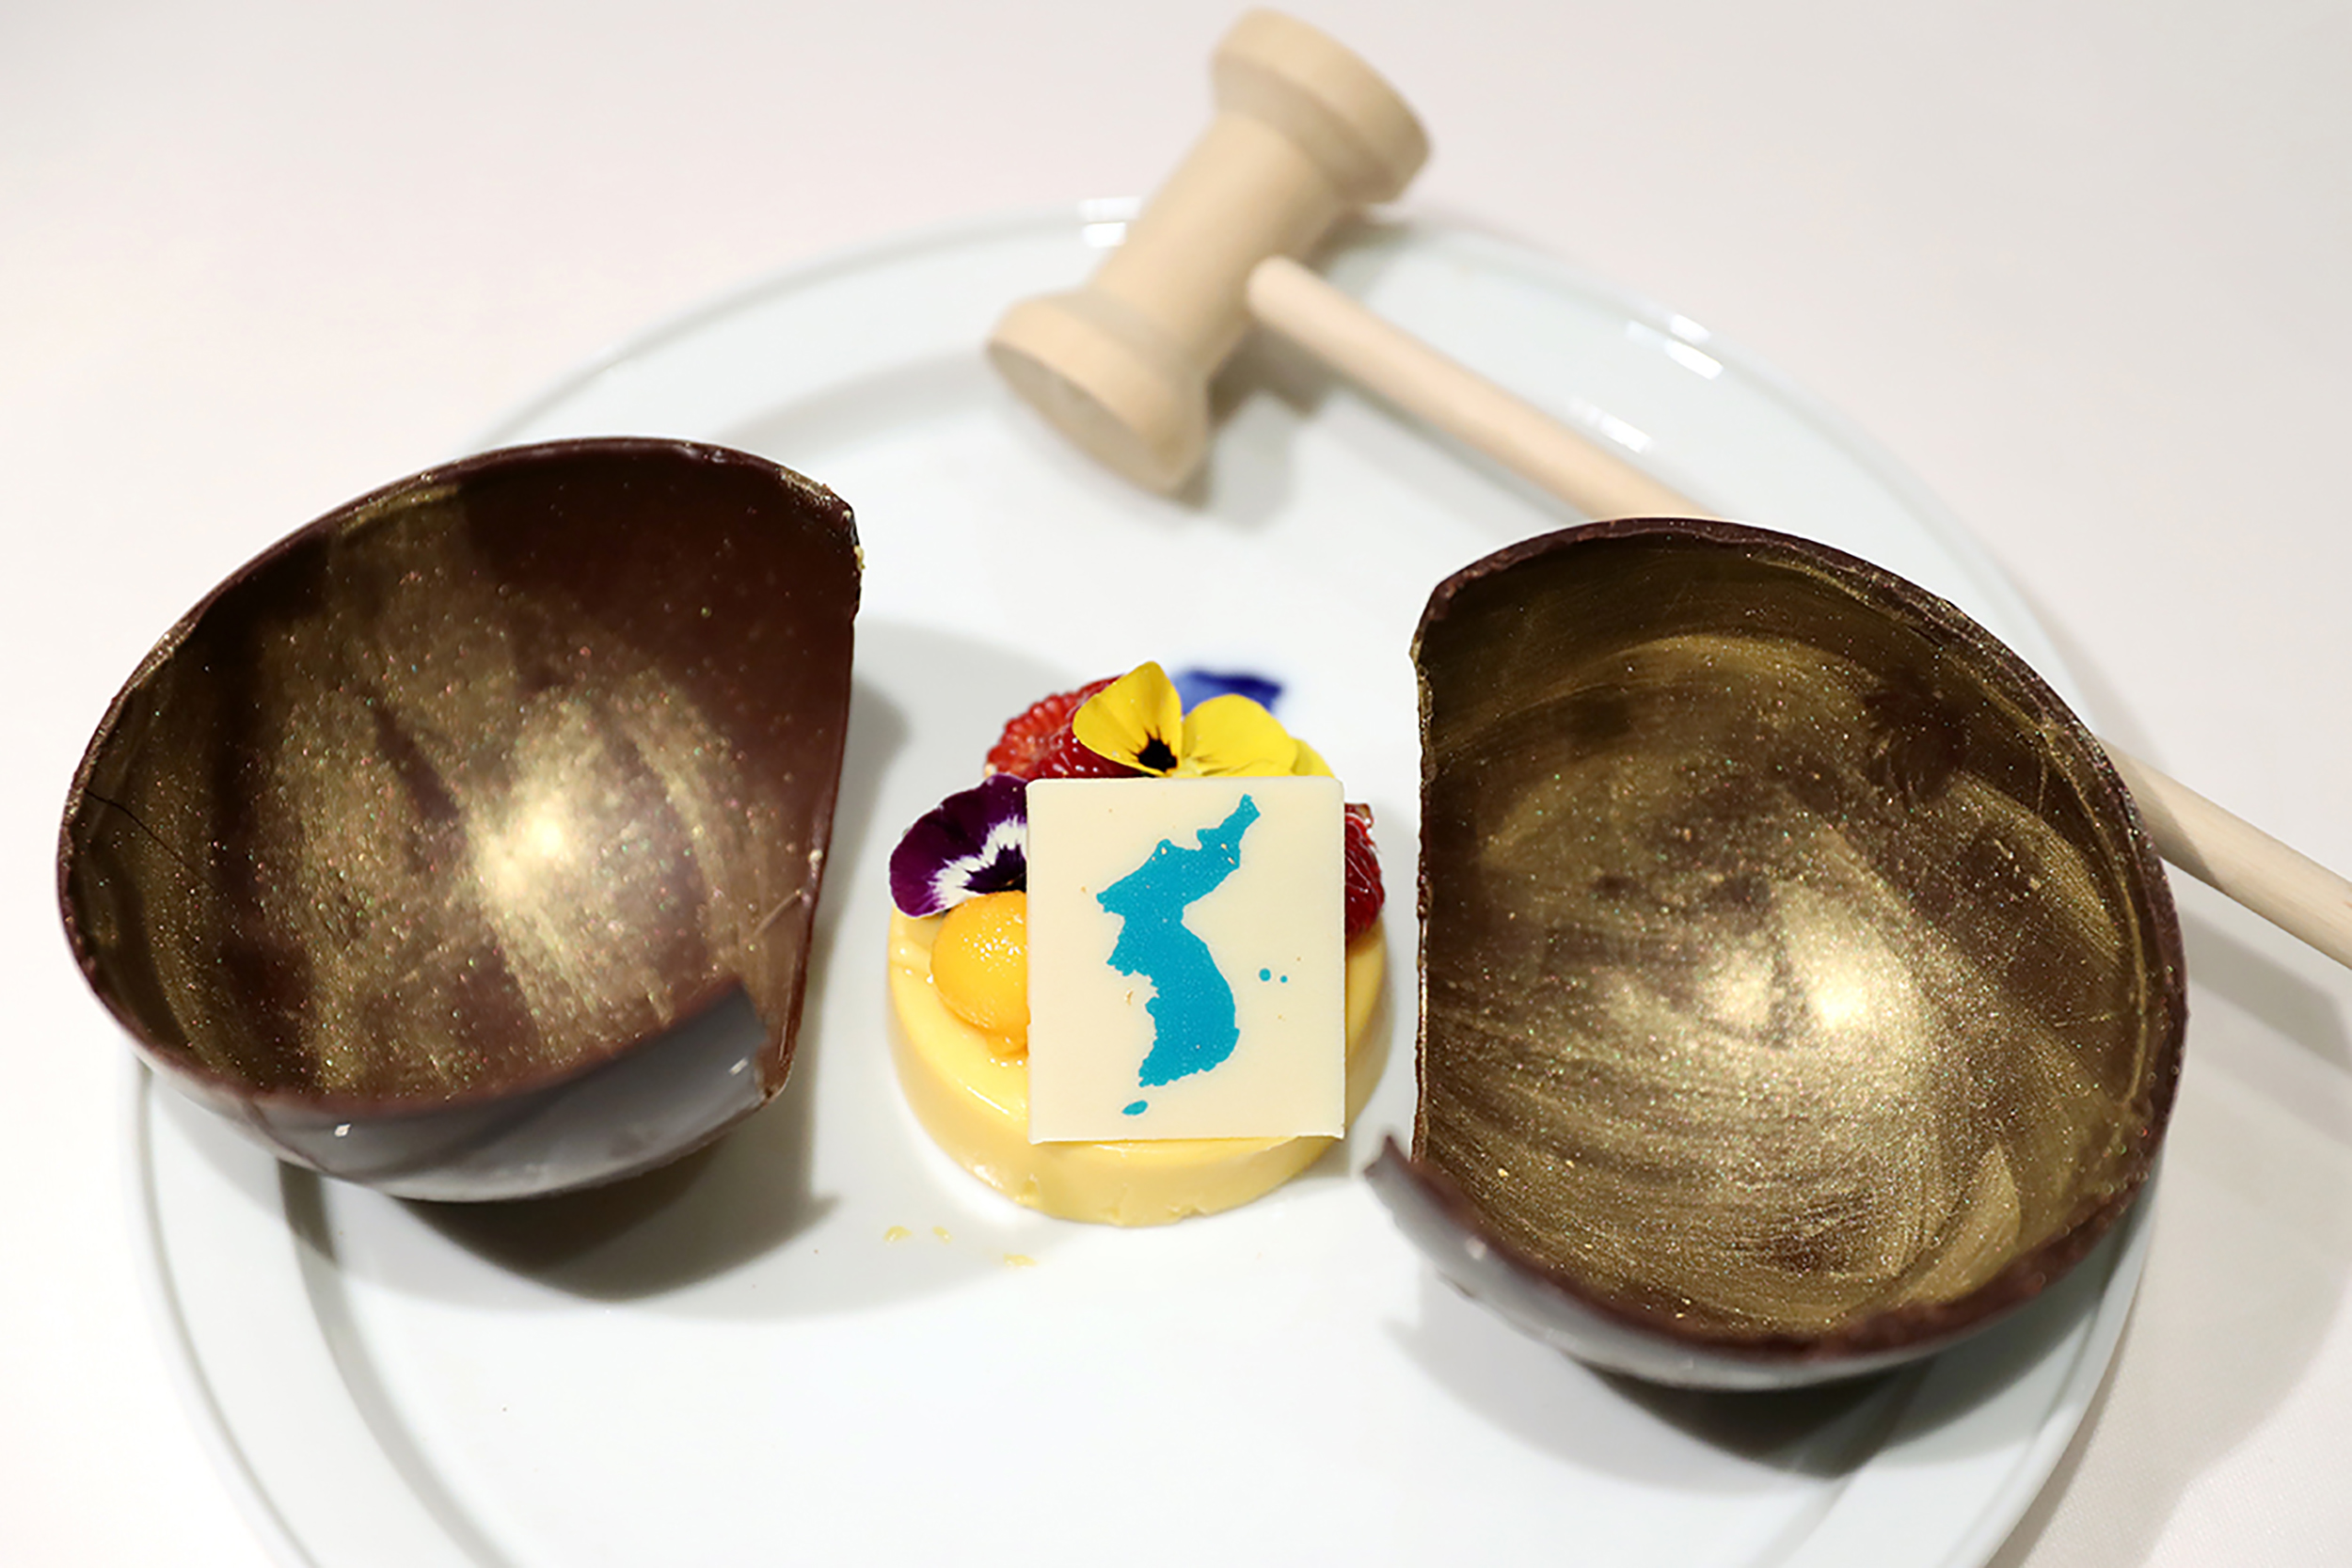 PHOTO: A mango mousse cake decorated with a garnish in the shape of a unified Korean peninsula, which will be served at the dinner of the upcoming inter-Korean summit. The wooden bowl will be broken by a hammer to symbolize the start of reconciliation.